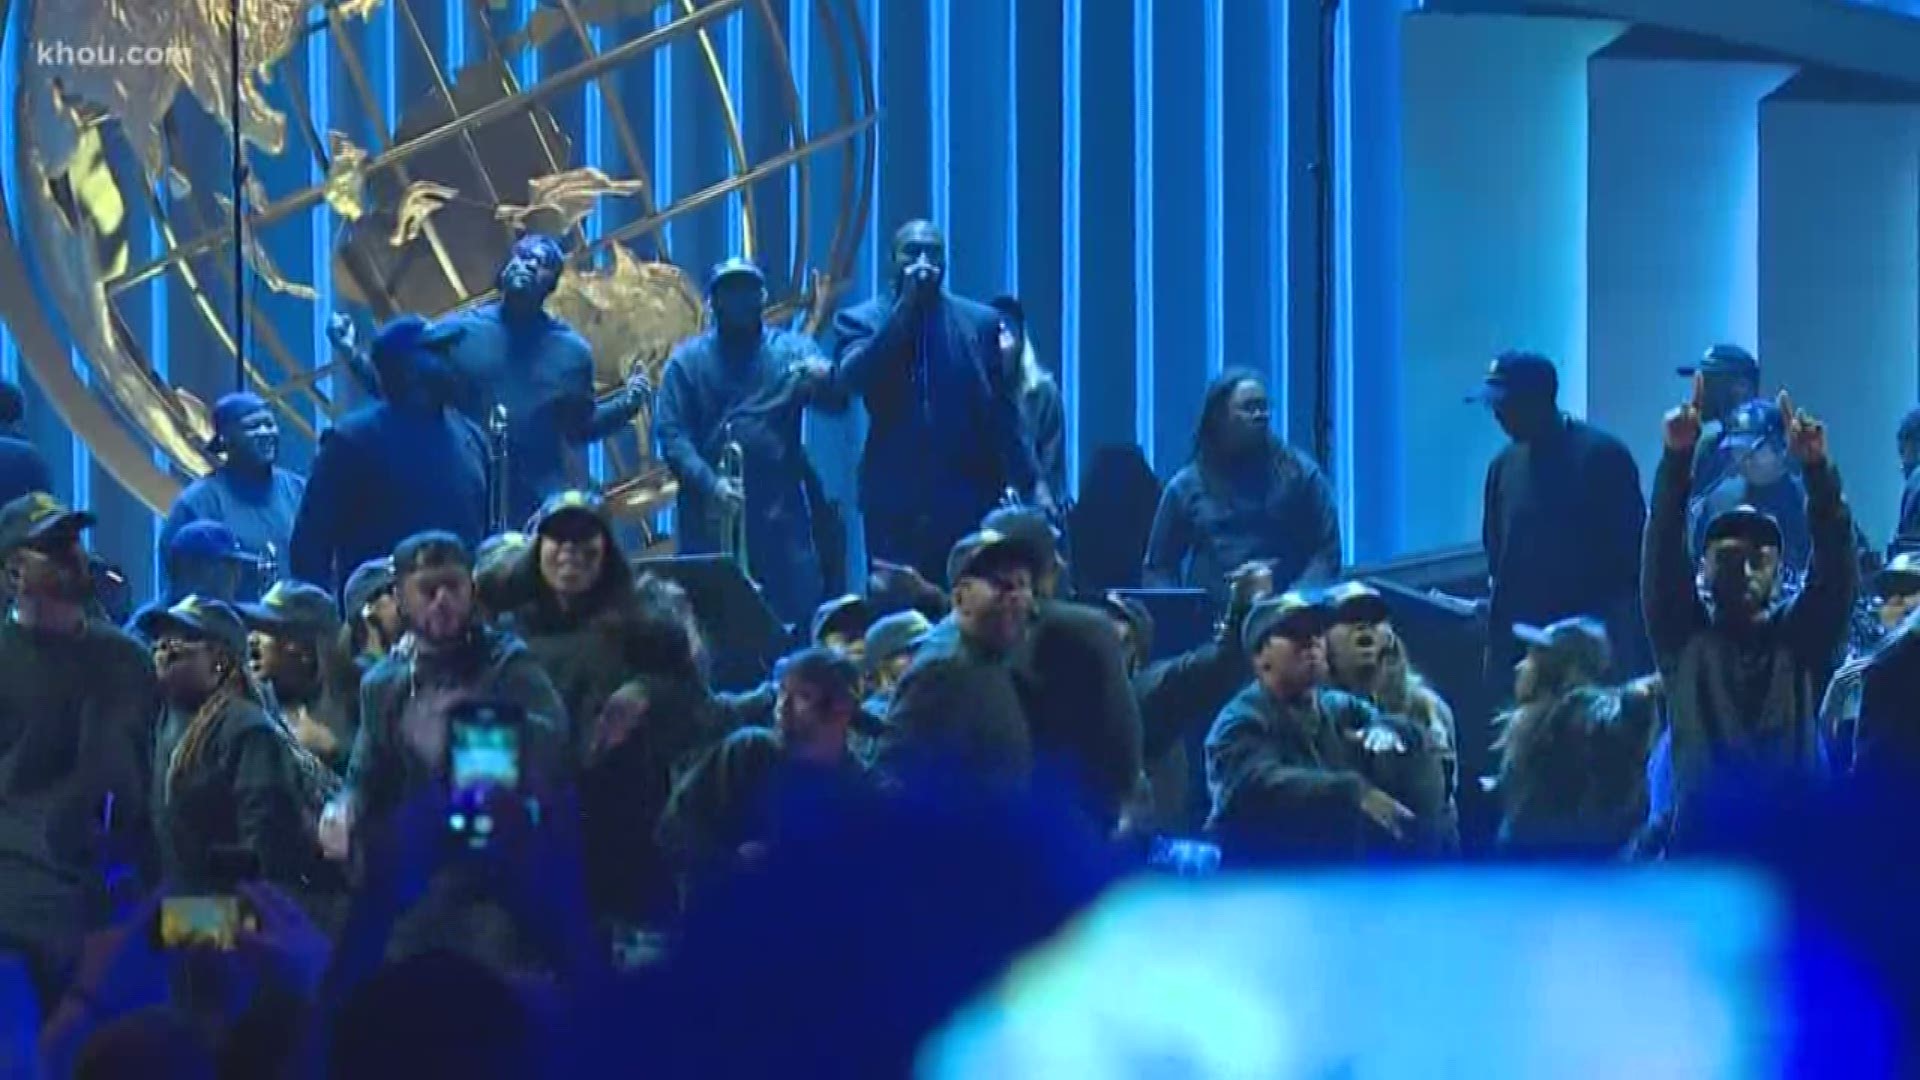 Kanye West and his choir performed at Lakewood Church in Houston on Sunday night.